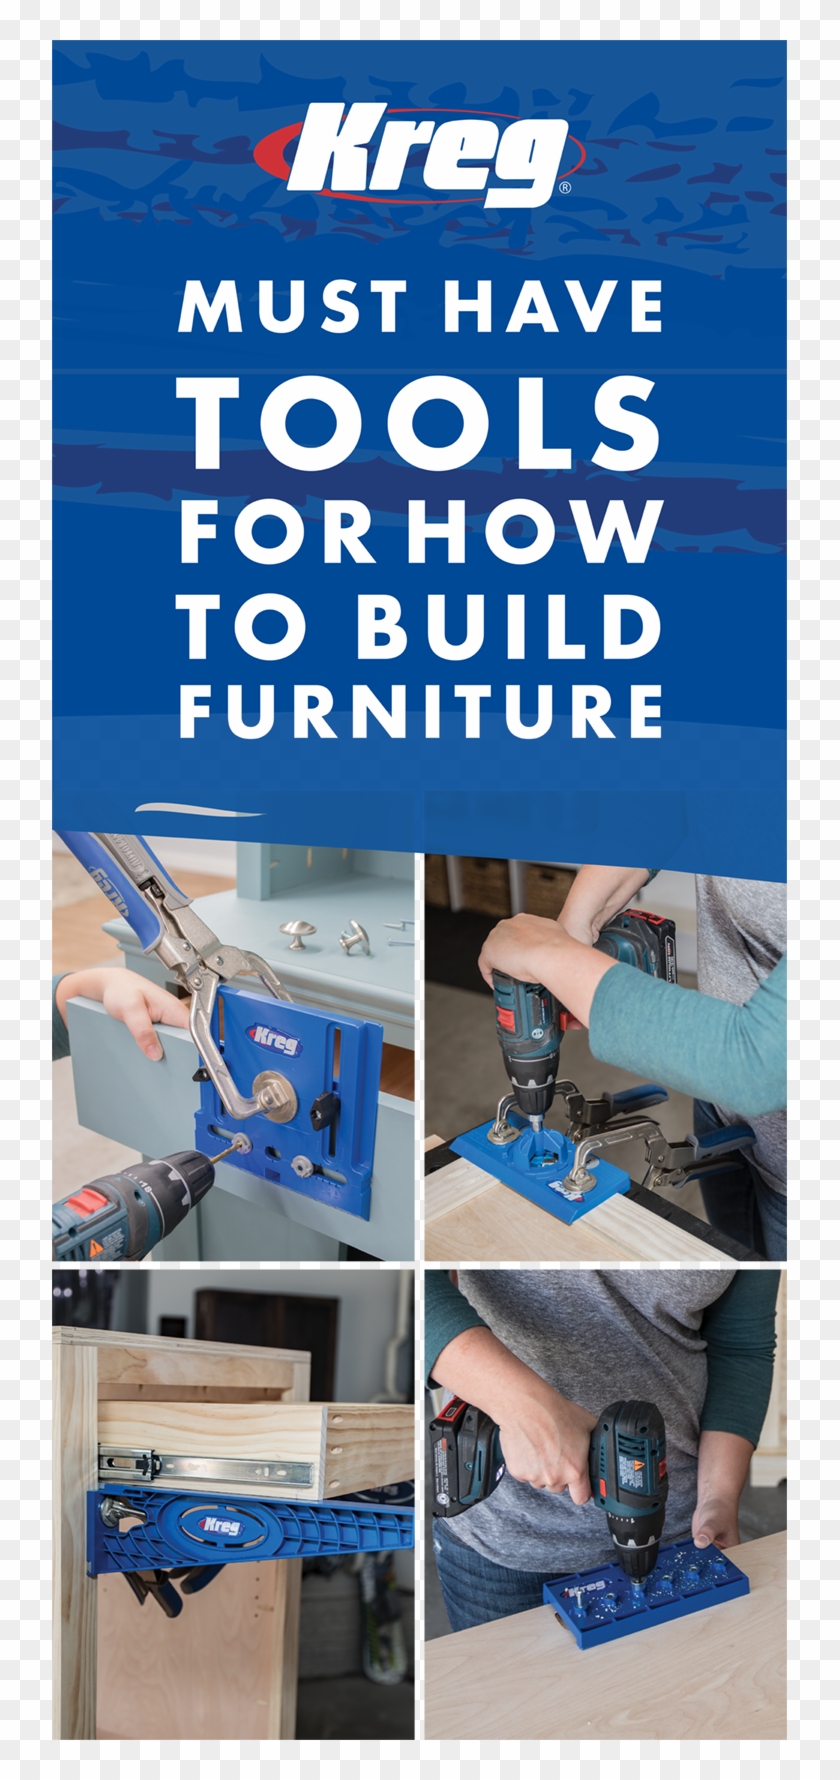 You Need These Four Tools To Build Your Own Furniture - Poster Clipart #5549018